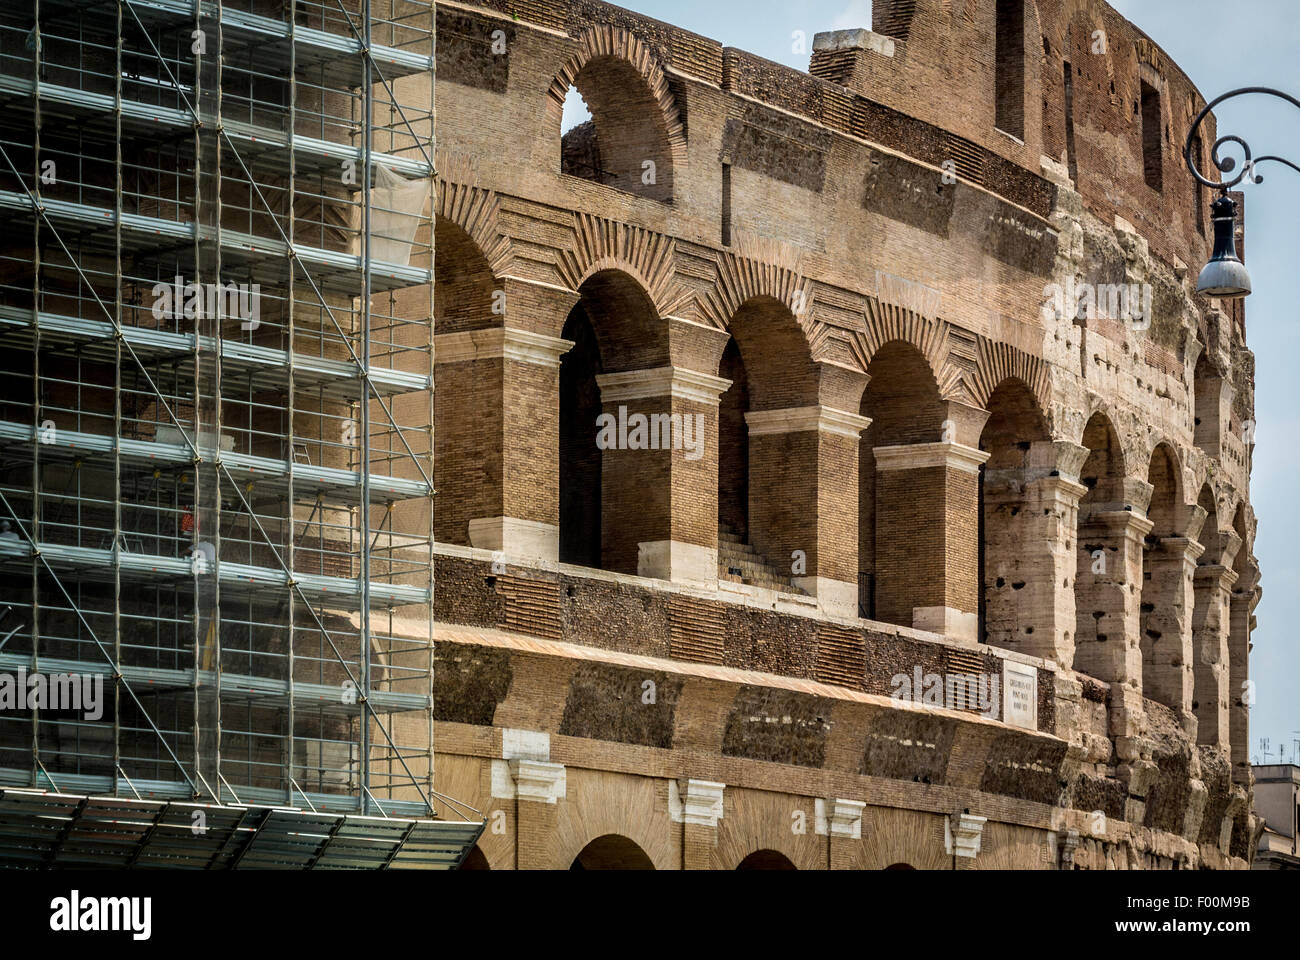 Scaffolding on the exterior façade of the Colosseum, Rome, Italy Stock Photo